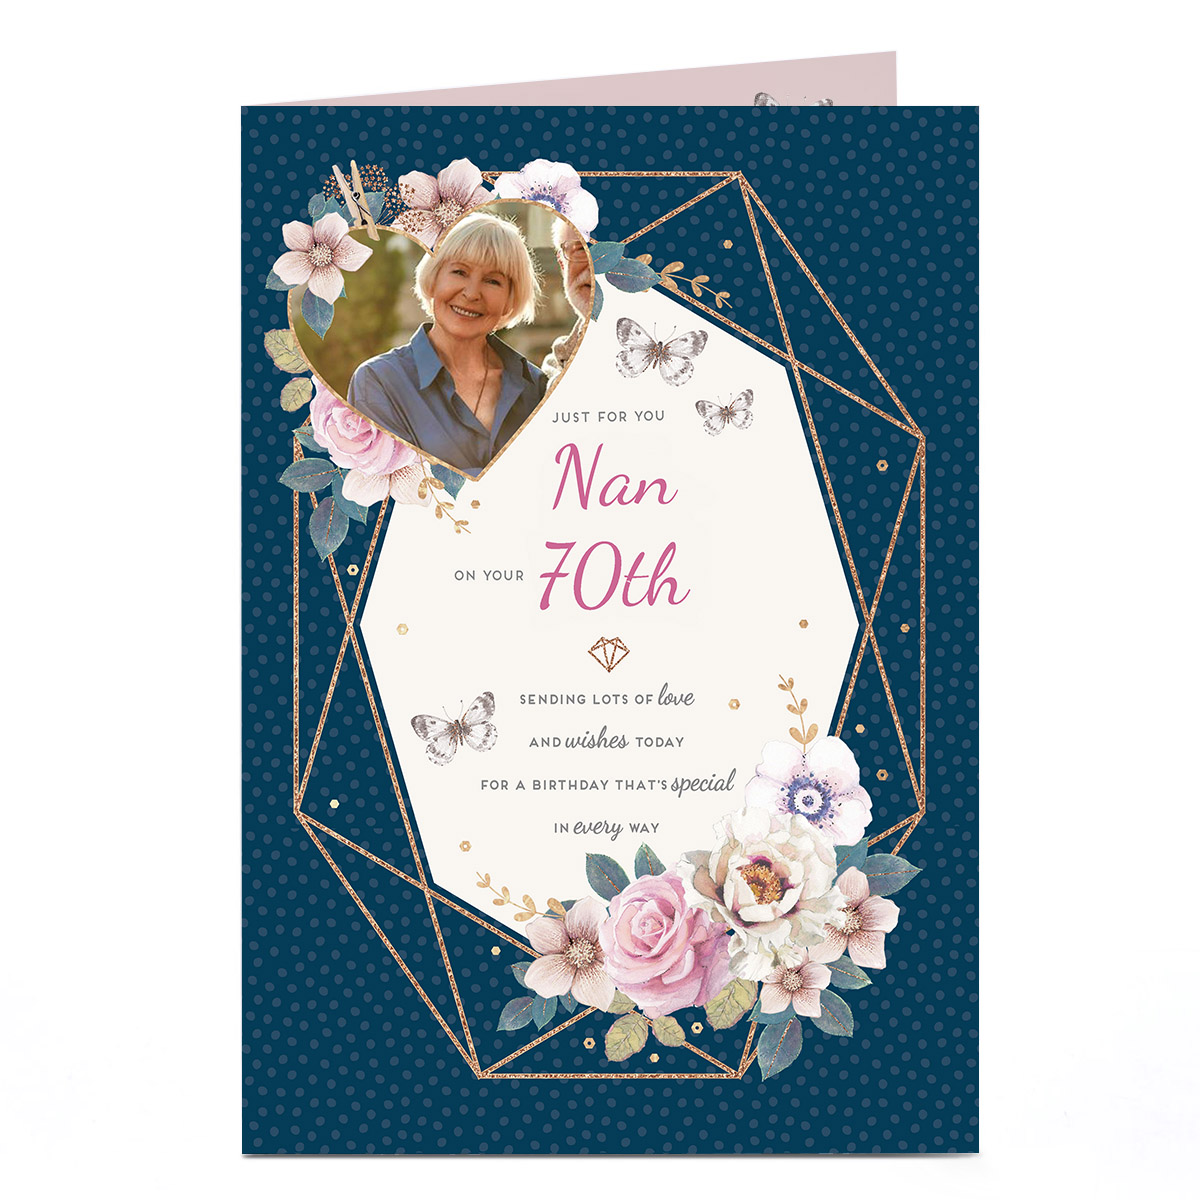 Photo 70th Birthday Card - Special in Every Way, Editable Age